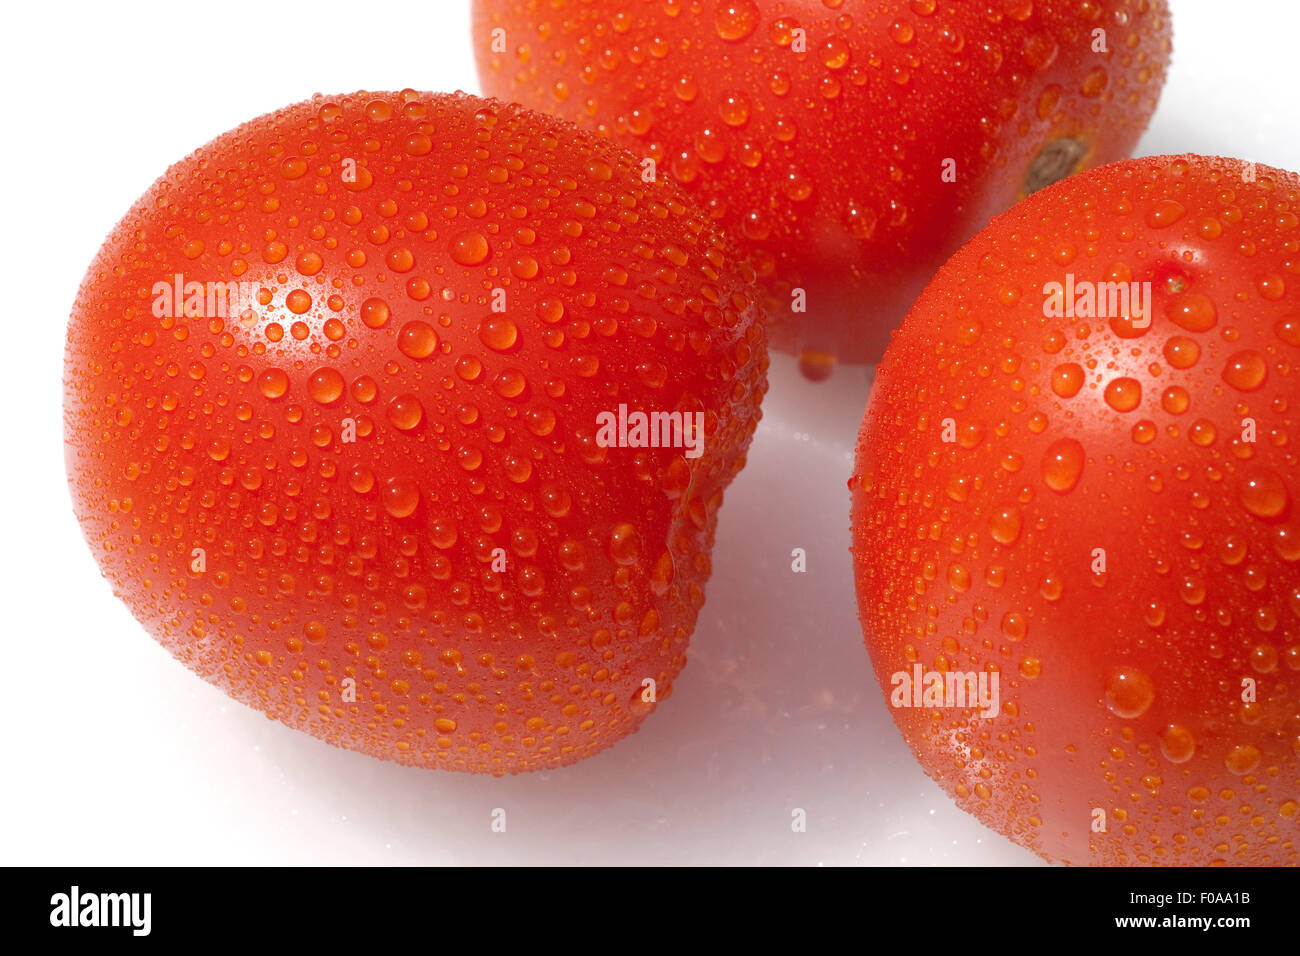 - photography stock hi-res Romatomaten Alamy and images